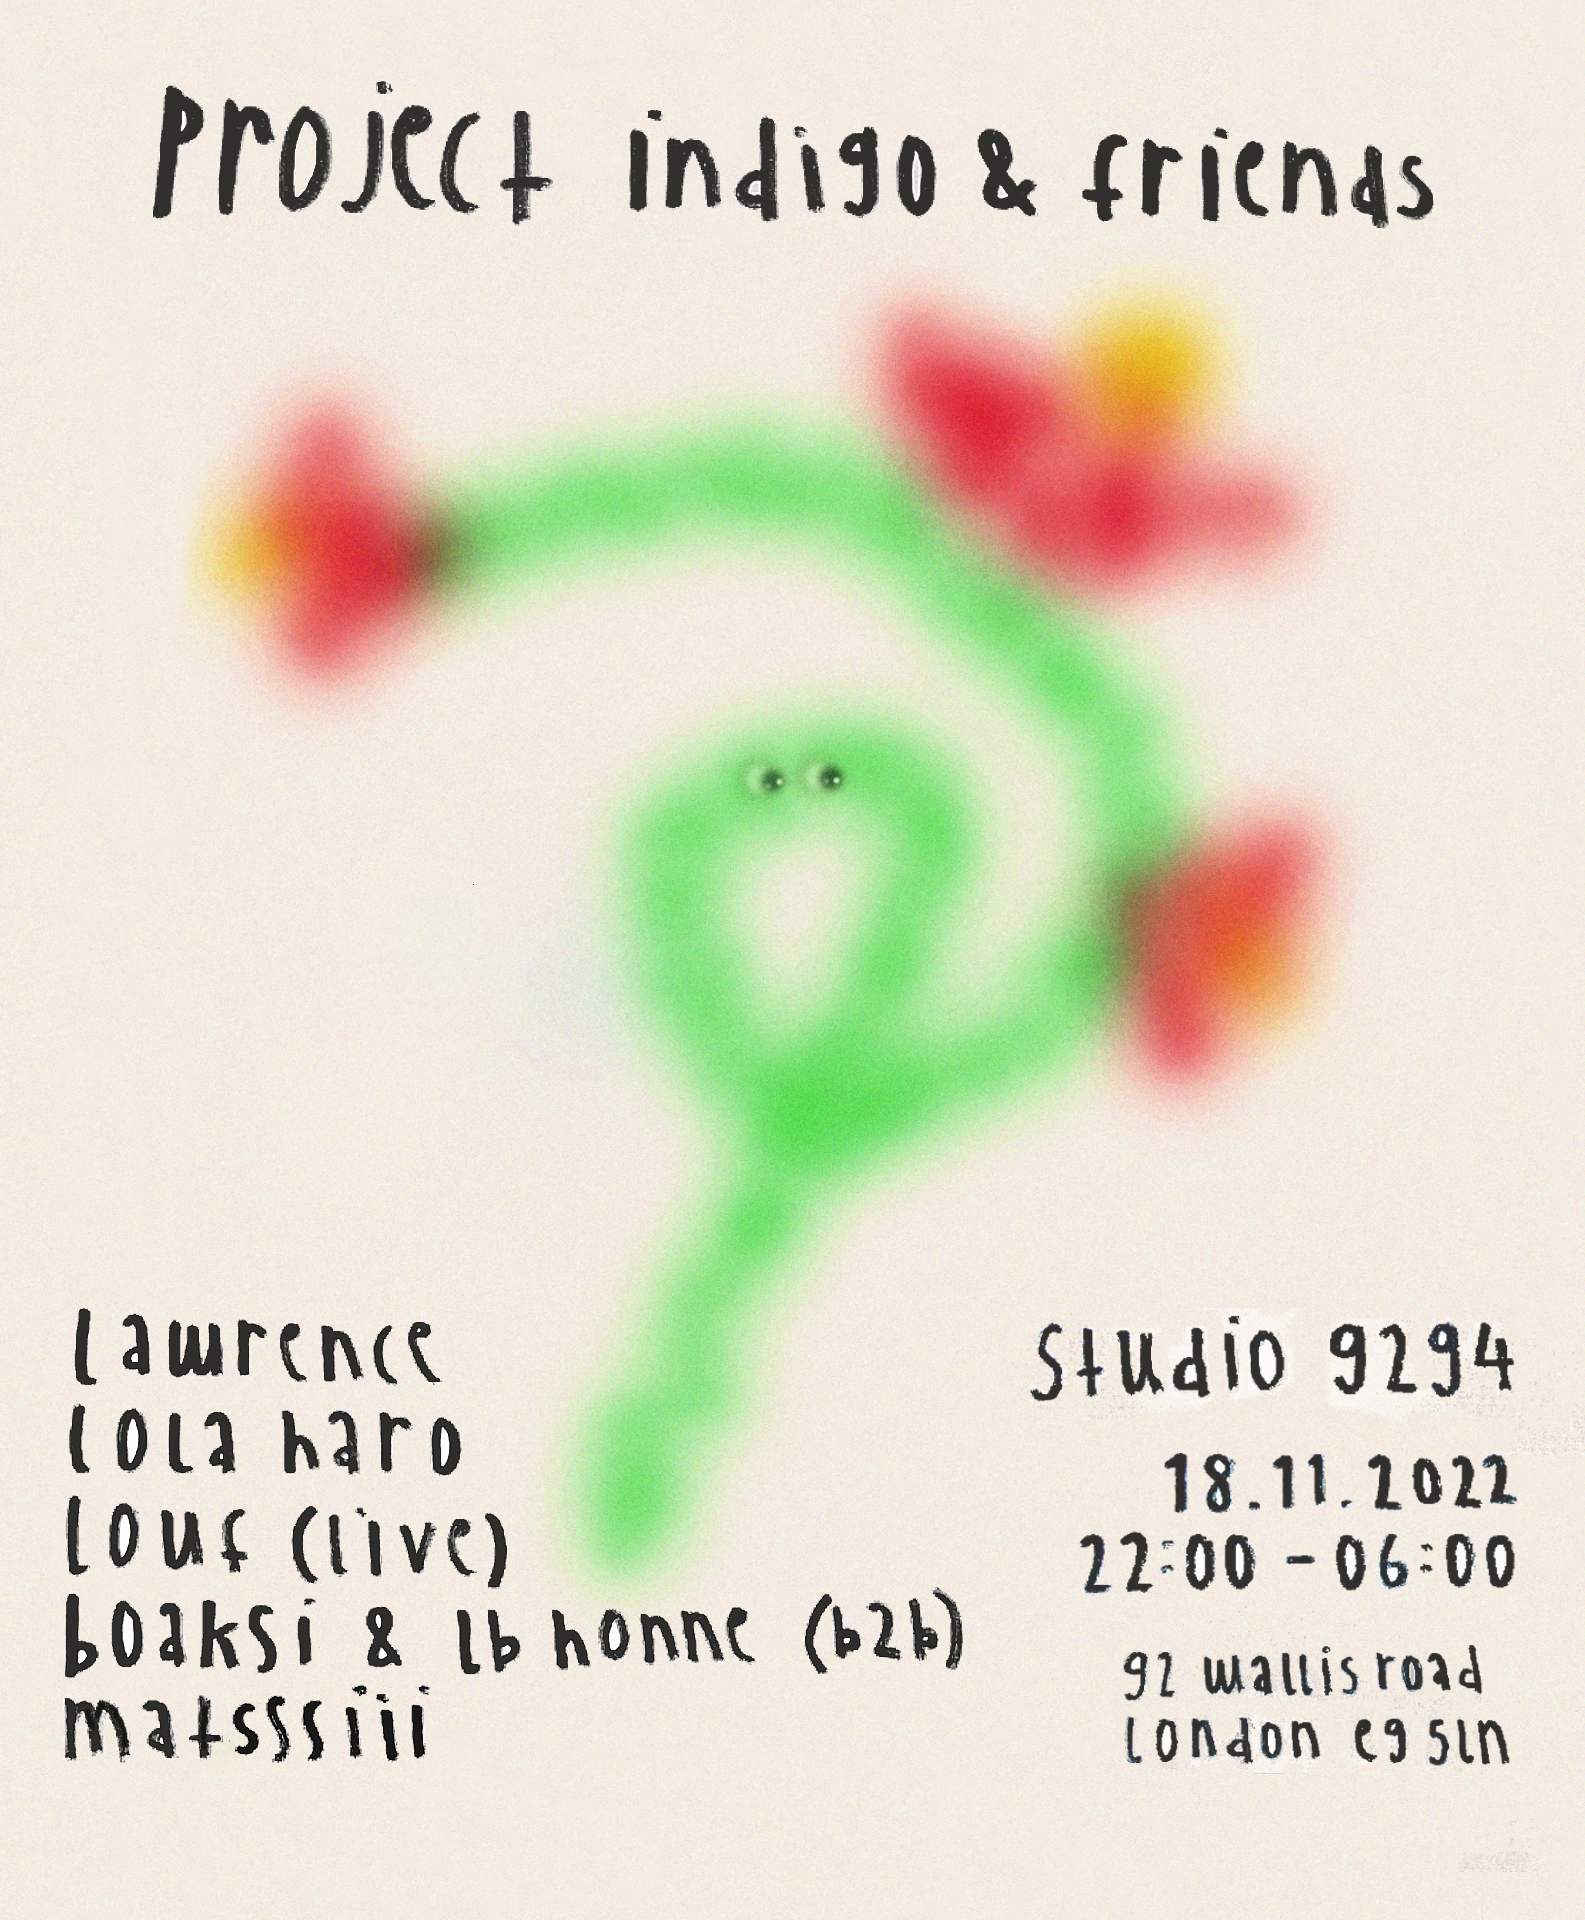 Project Indigo & Friends with Lawrence, Lola Haro & Louf (live) - フライヤー裏